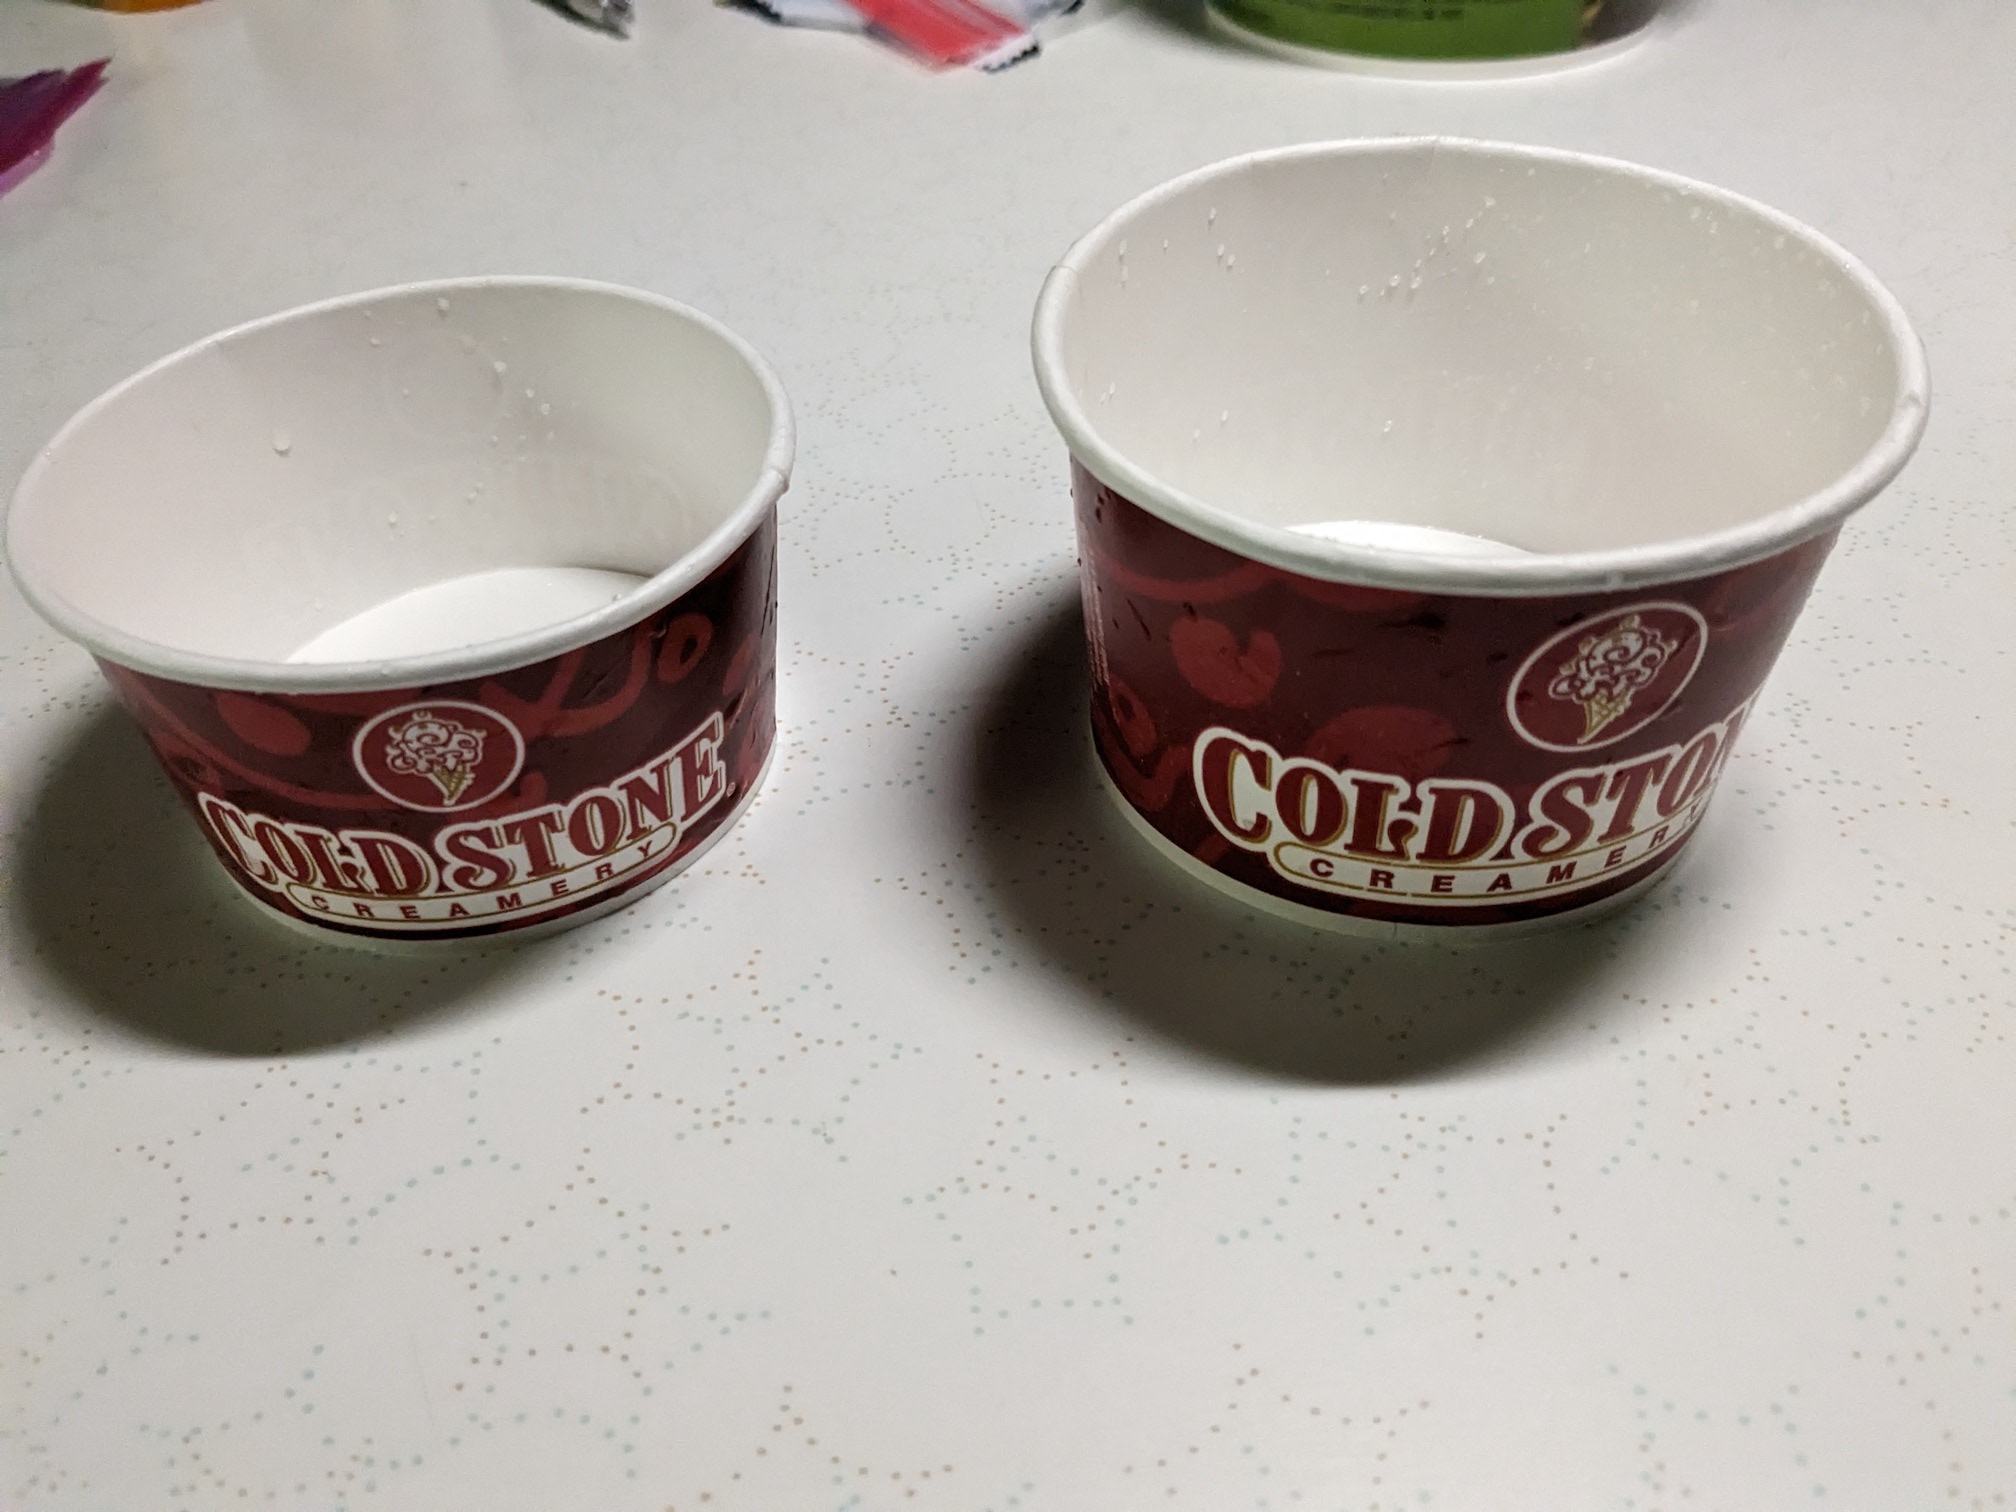 Separated bowls